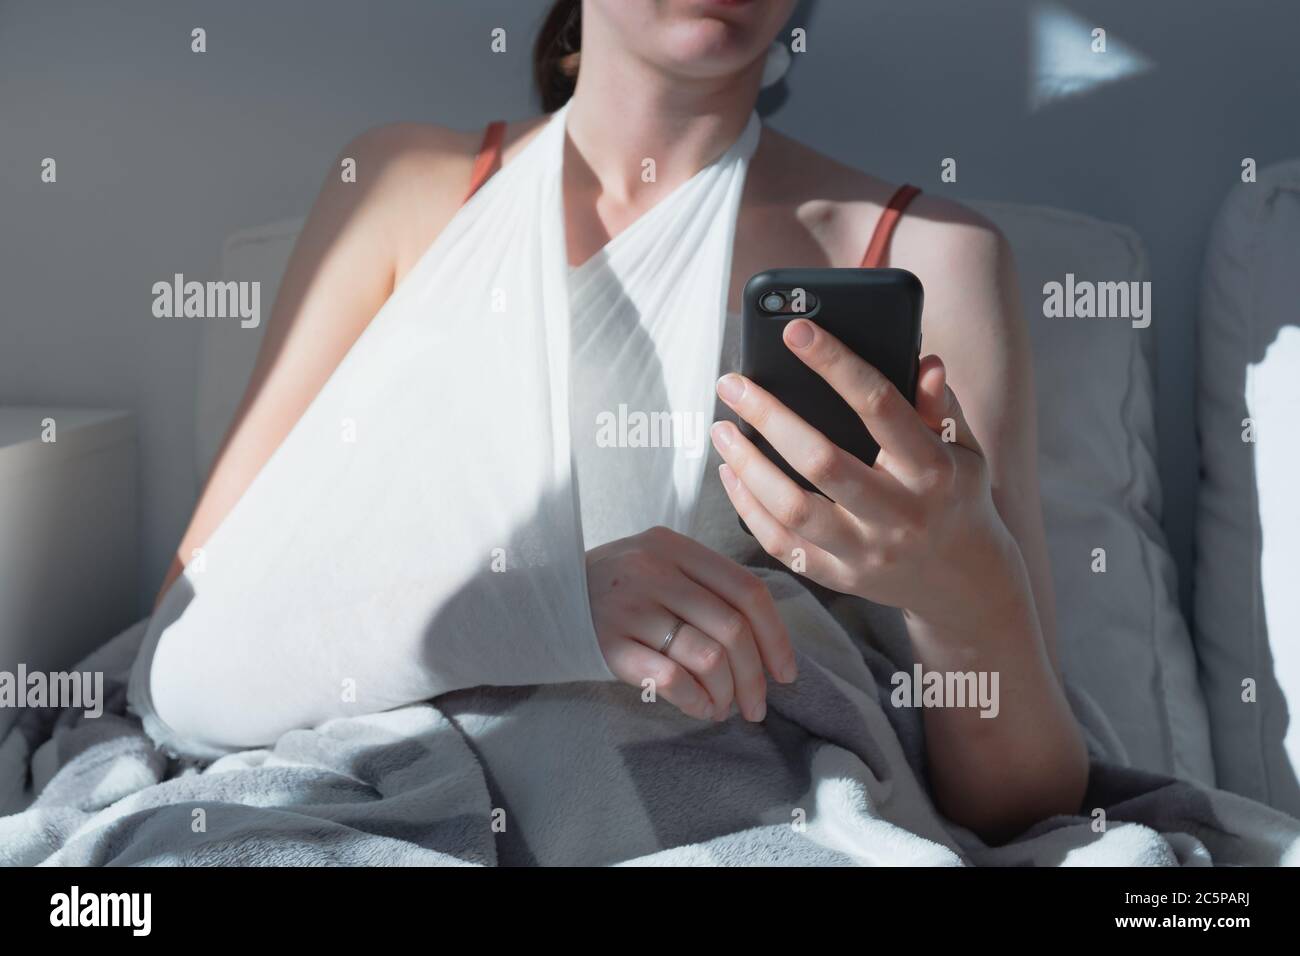 Wounded arm in bondage, woman rests in  bed, body parts. Caucasian female adult in bright sun-lit room holds a phone, concept of self treatment, medic Stock Photo